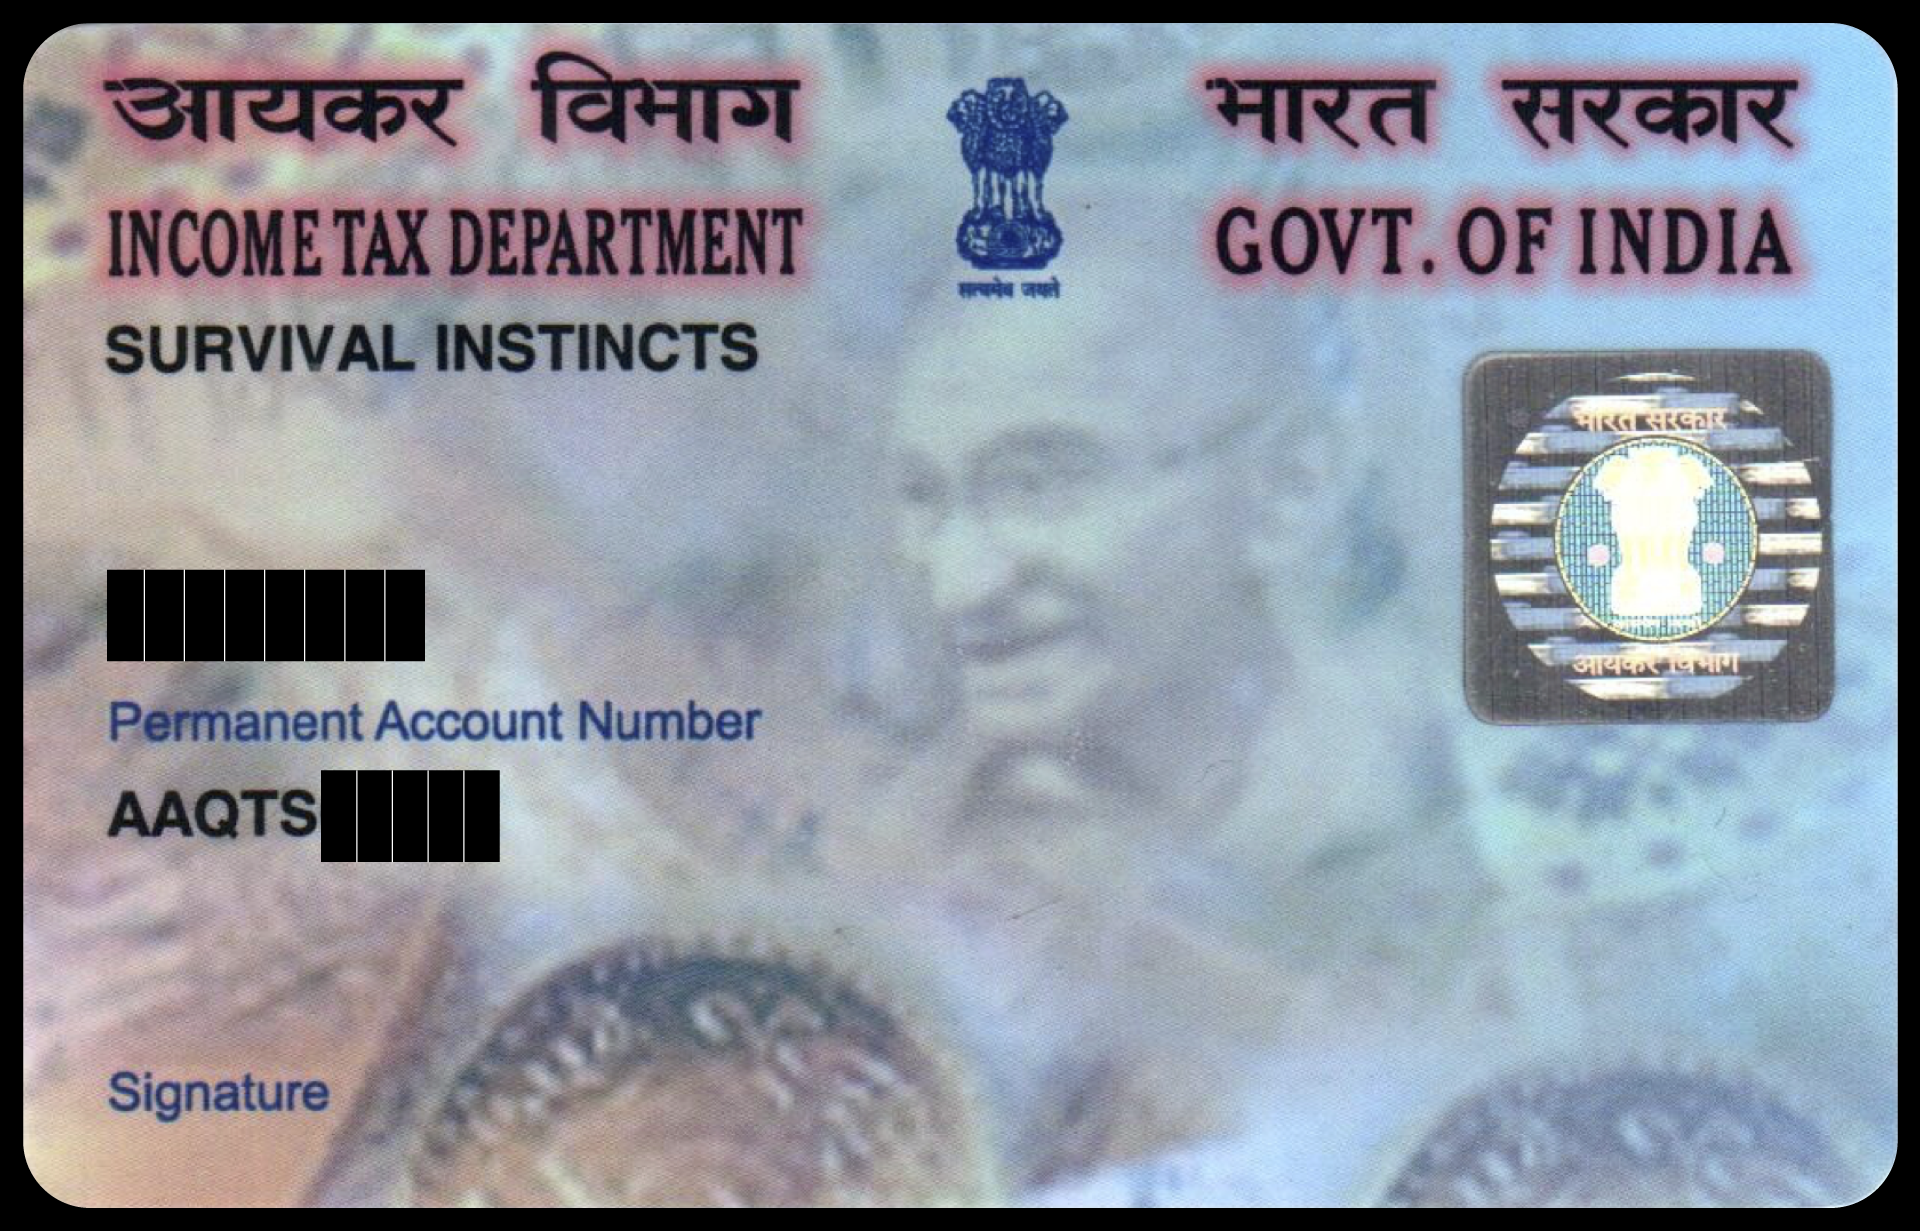 Please contact us for an audited chartered account copy of our accounts. Our PAN card with the Government of India can also be requested.